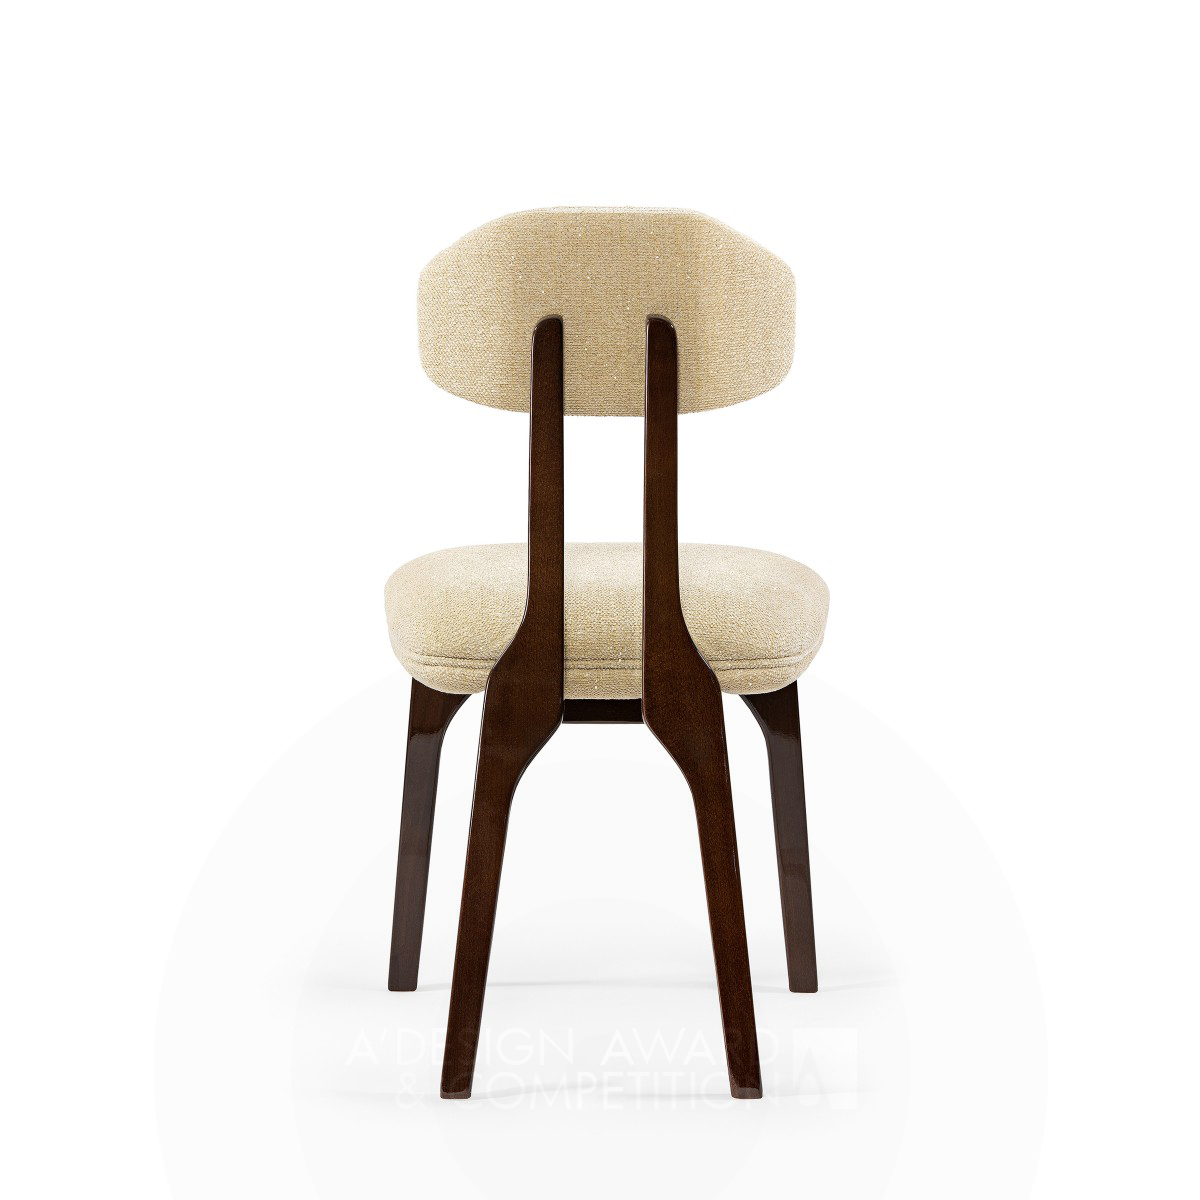 Joana Santos Barbosa wins Iron at the prestigious A' Furniture Design Award with Silhouette Dining Chair.